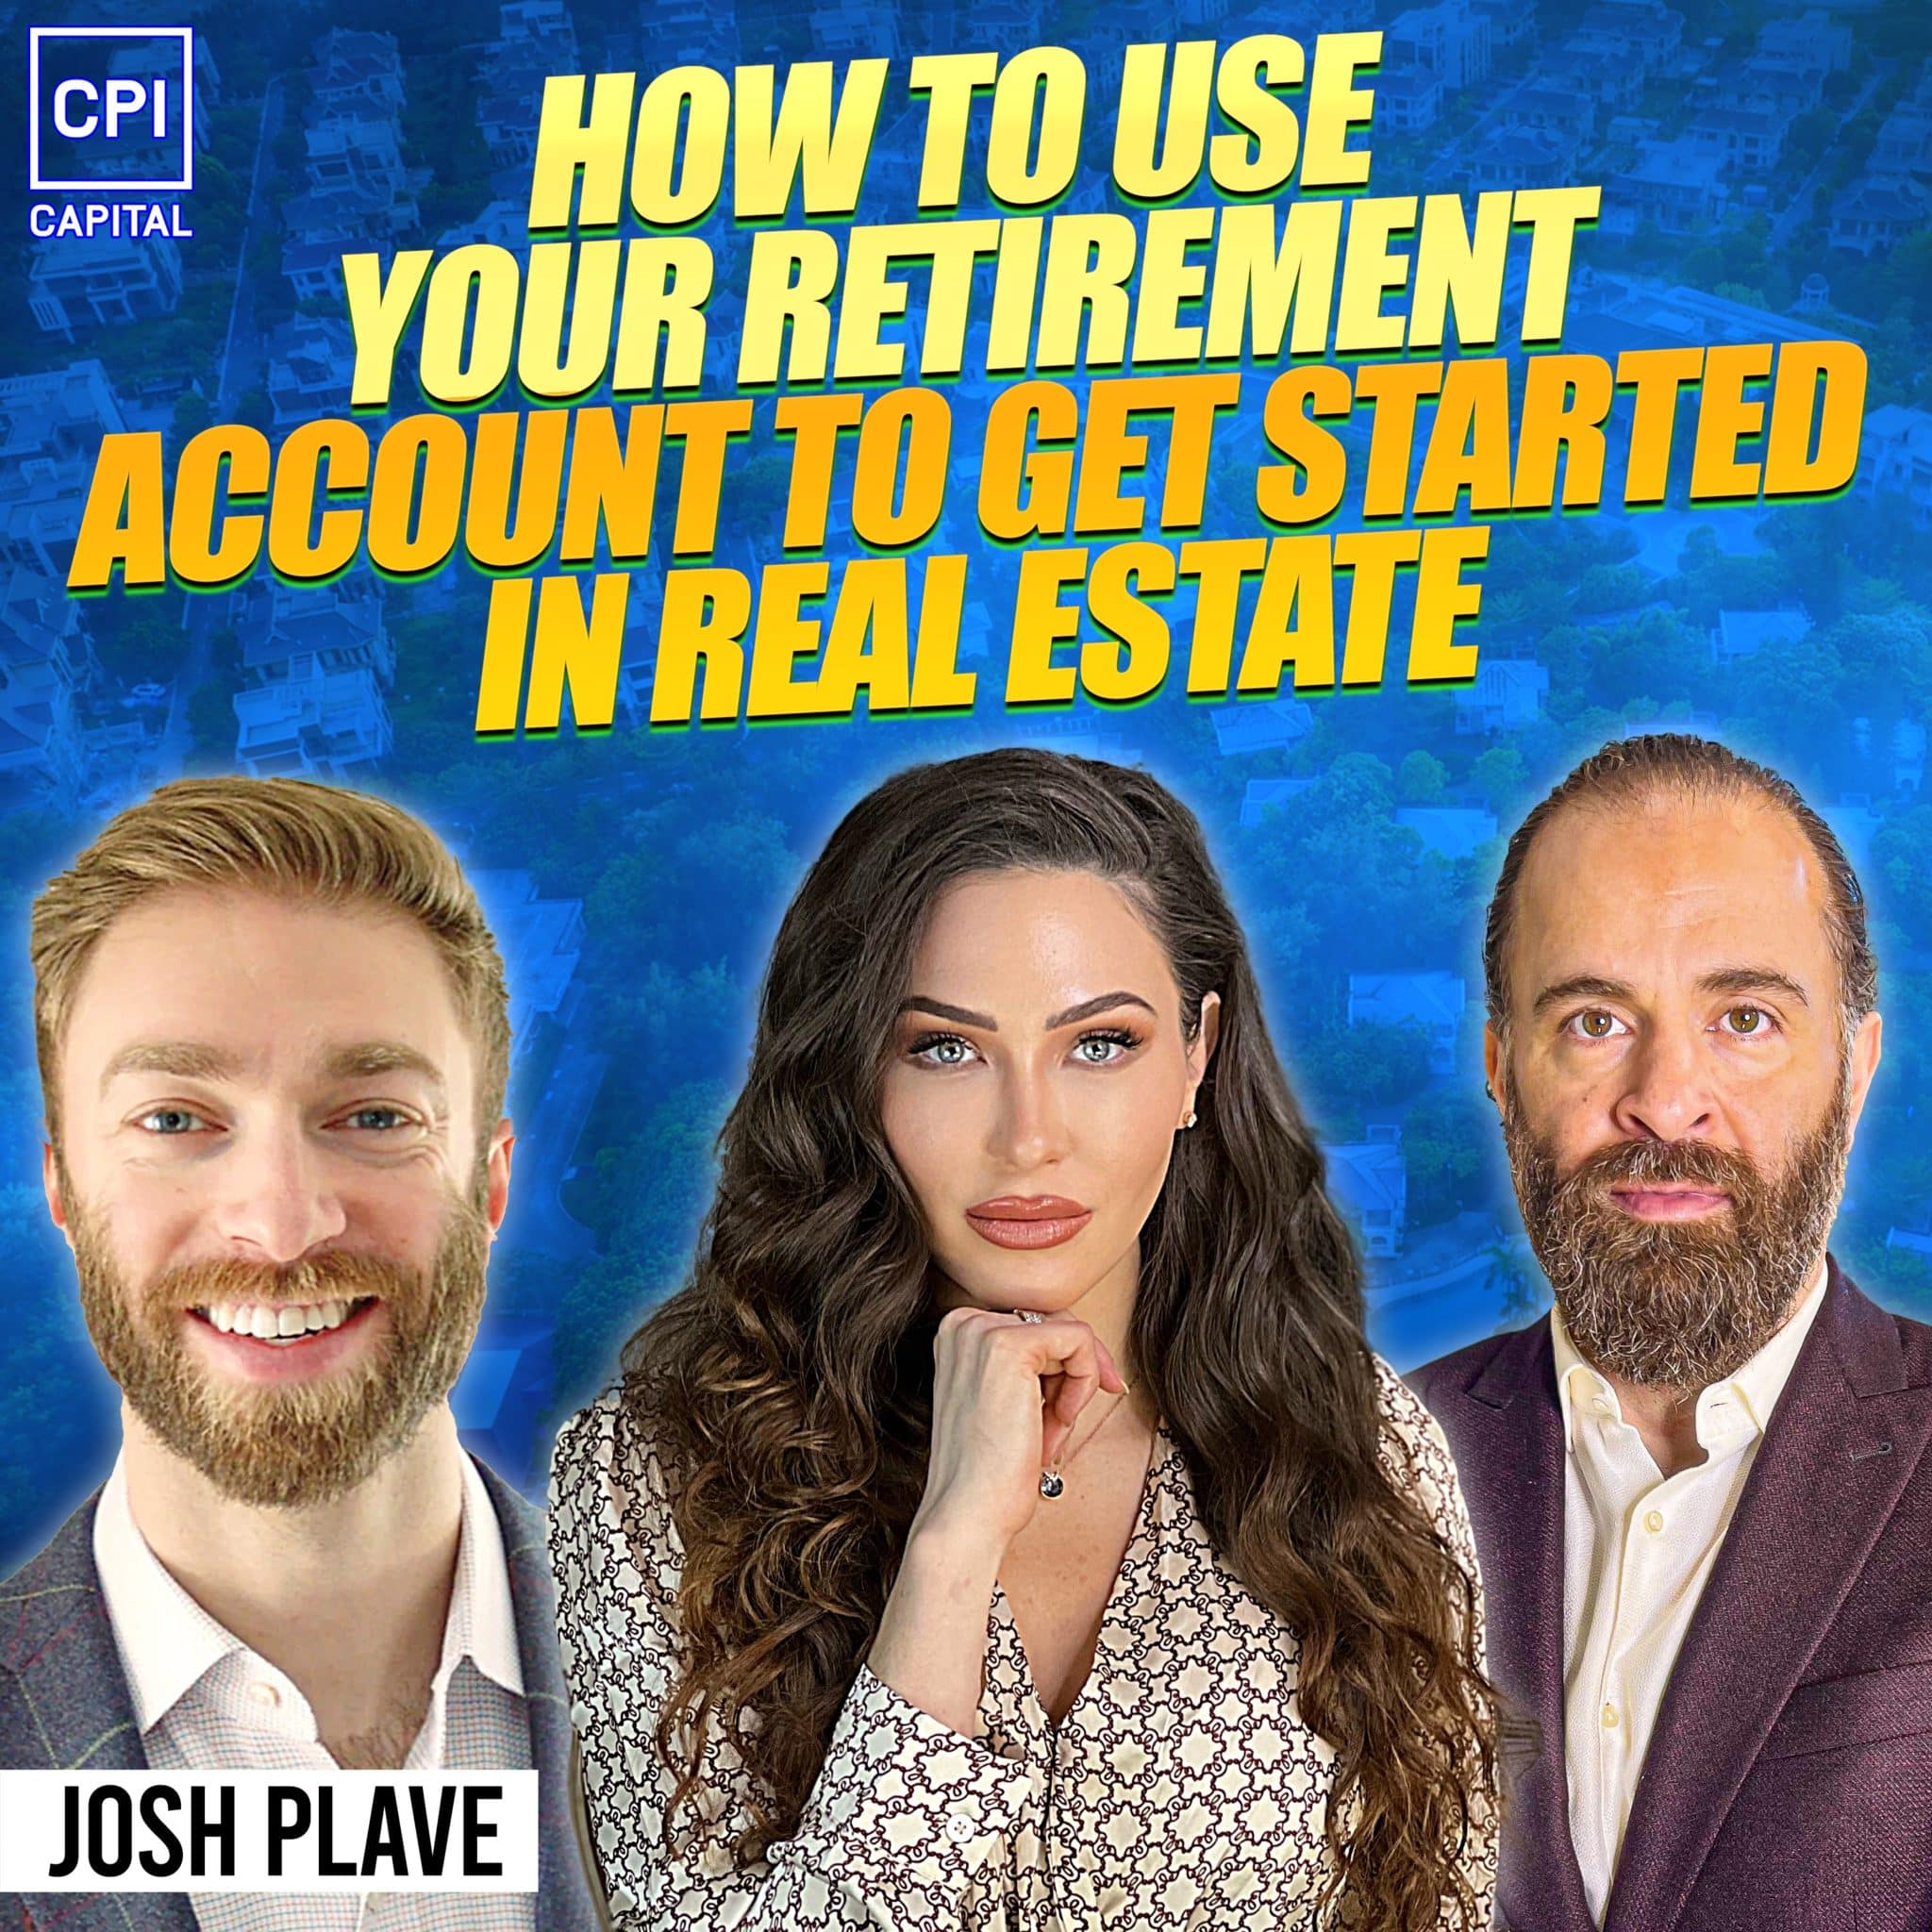 How To Use Your Retirement Account To Get Started In Real Estate – Josh Plave